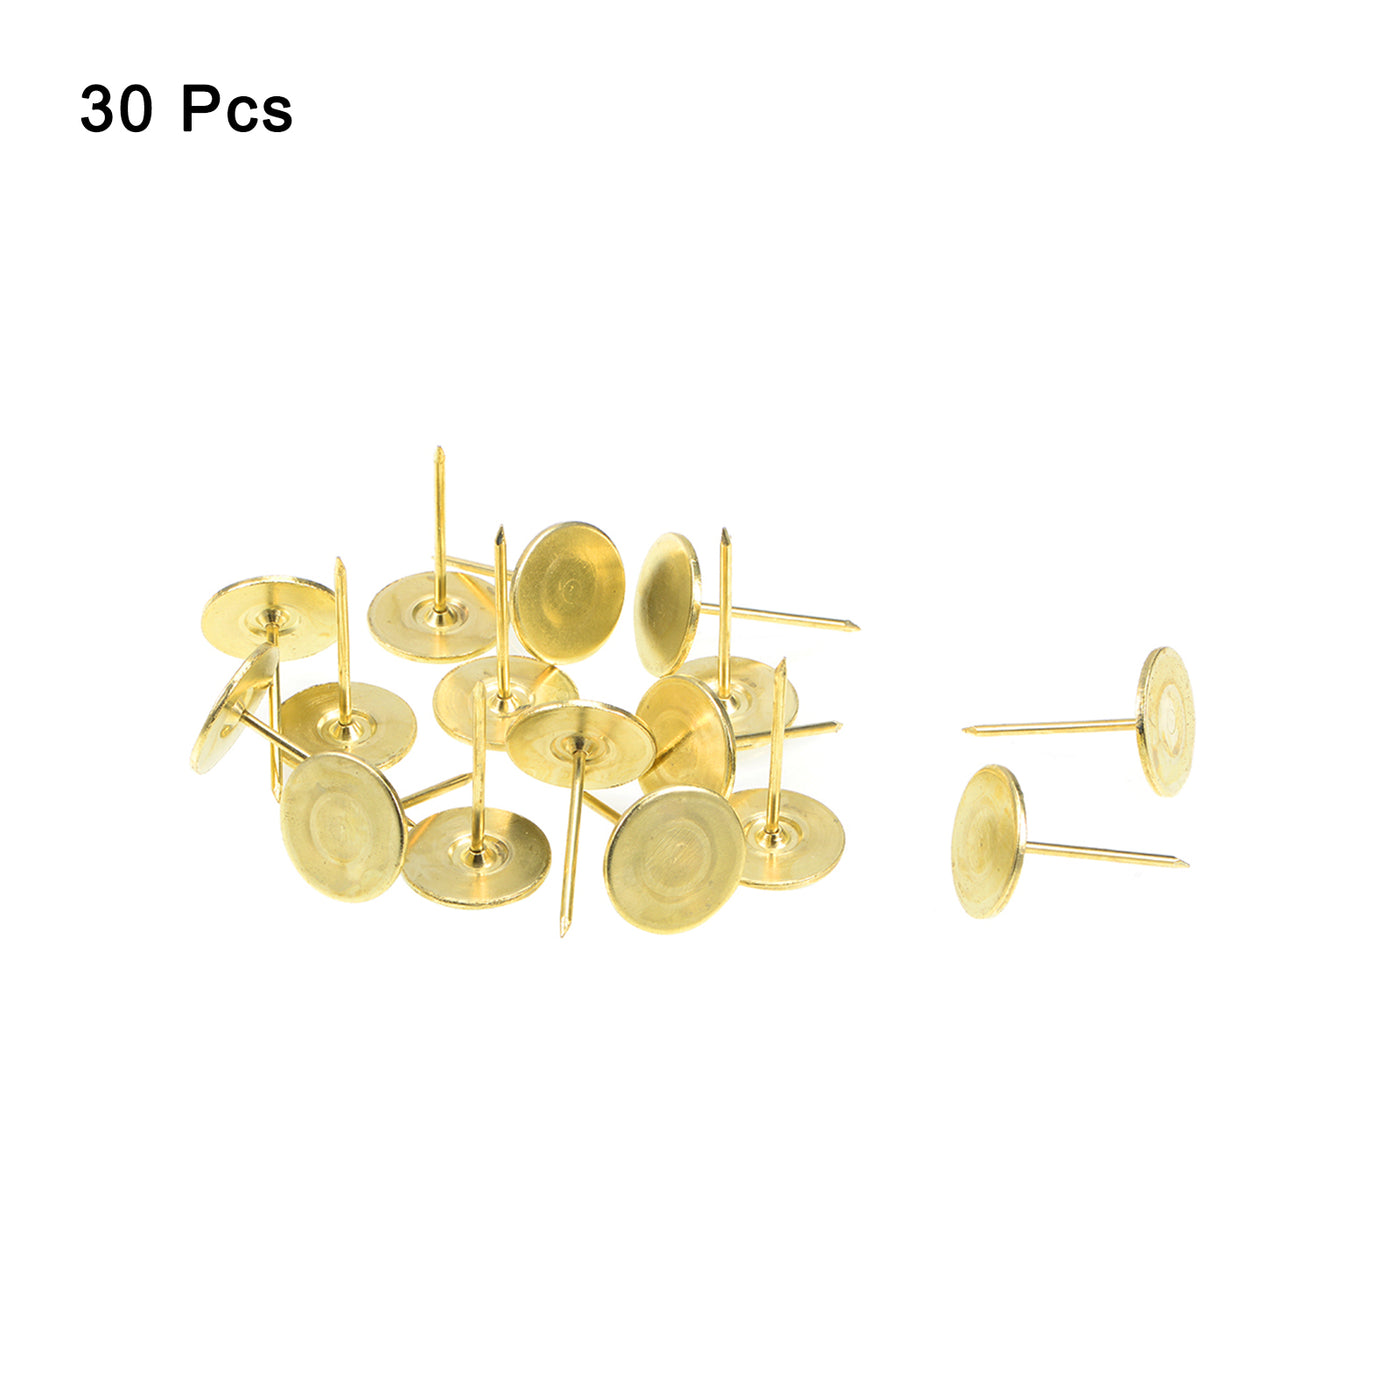 uxcell Uxcell 30Pcs 19mmx30mm Flat Head Decorative Upholstery Tacks Furniture Nails, Gold